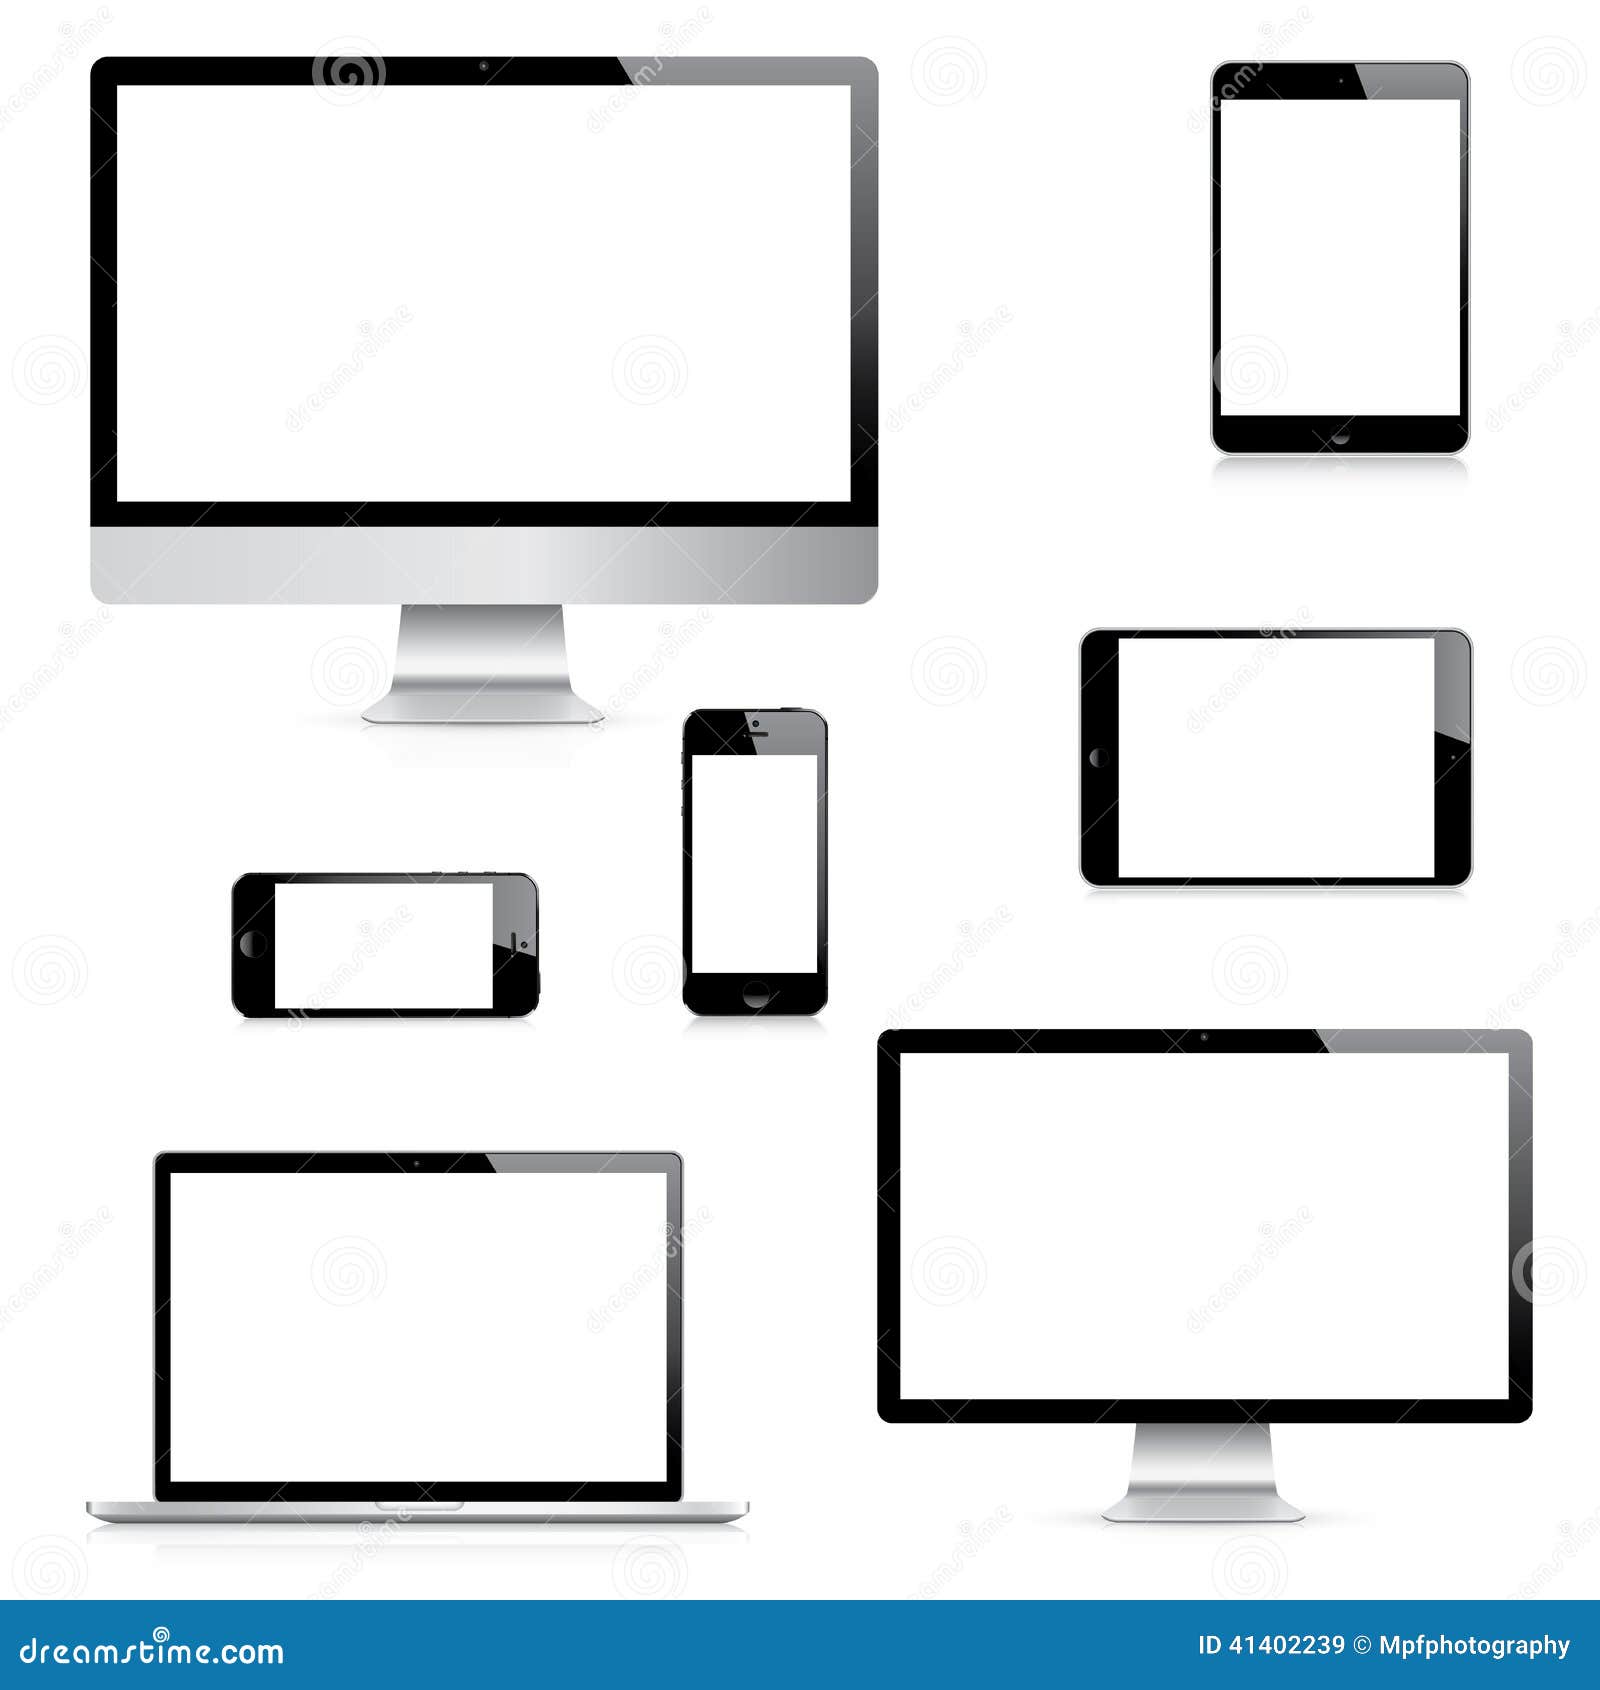 modern realistic computer, laptop, tablet and smartphone s set